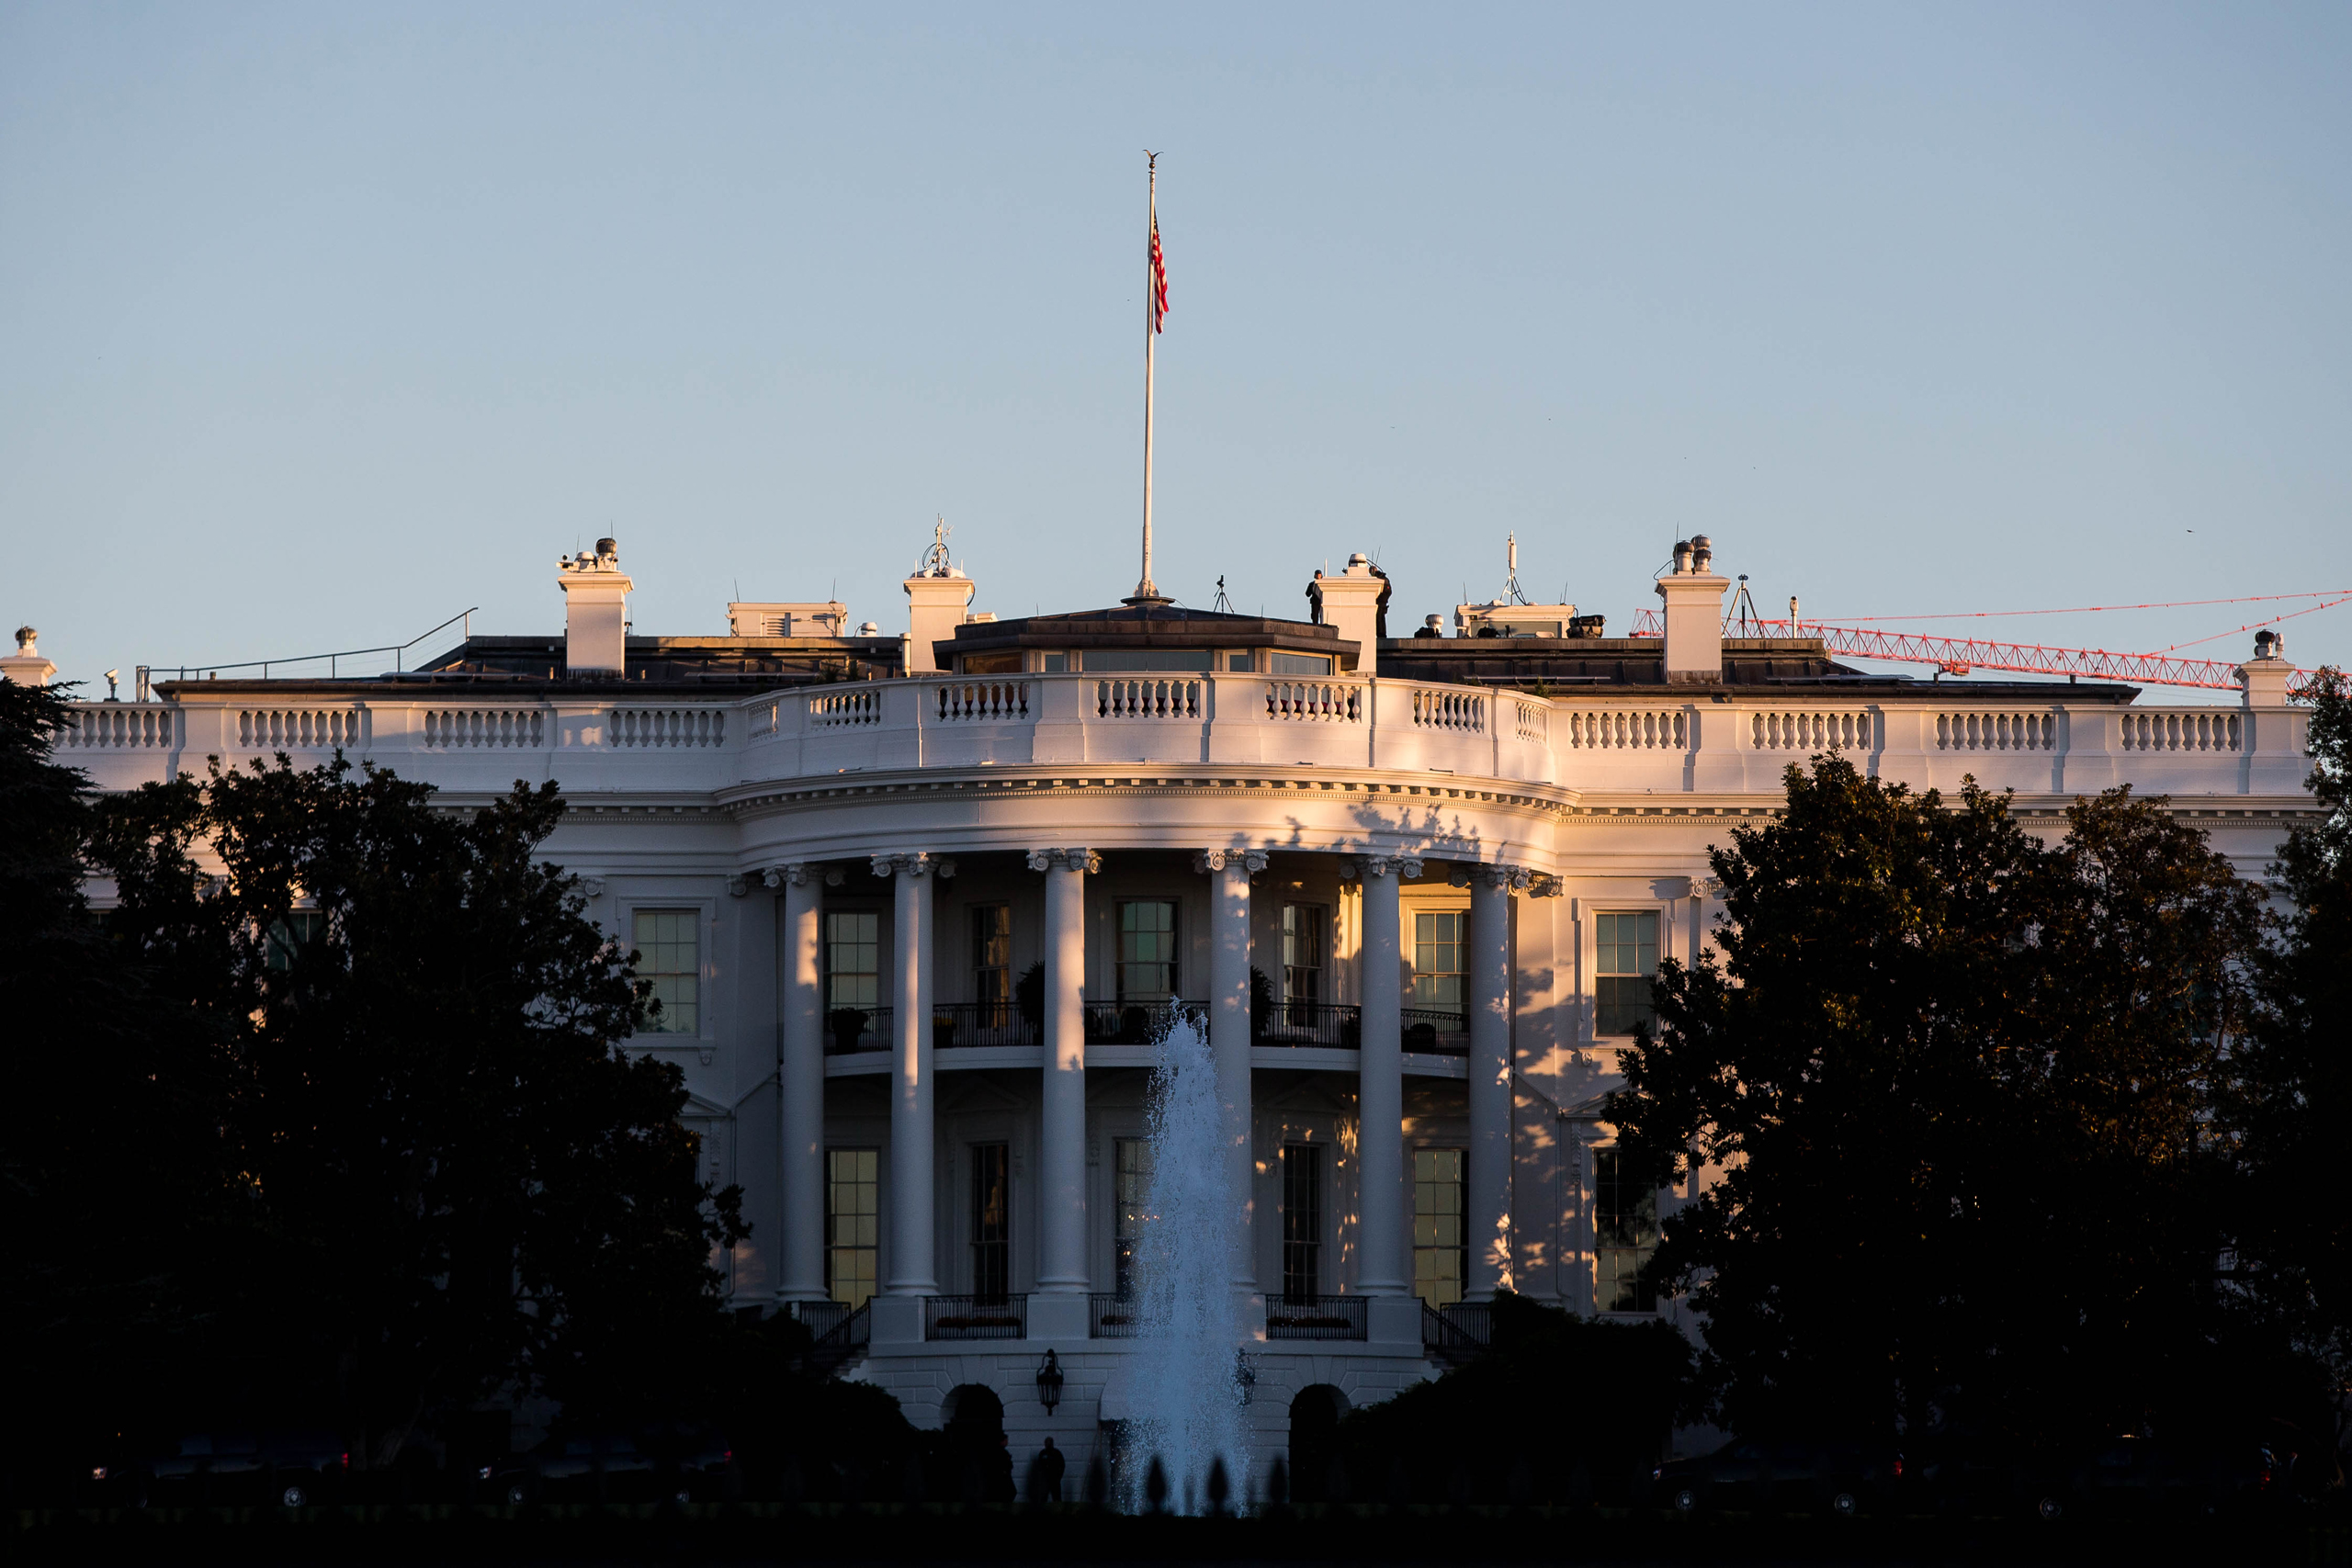 Zillow Put a Price Tag on the White House and It’s Not Cheap